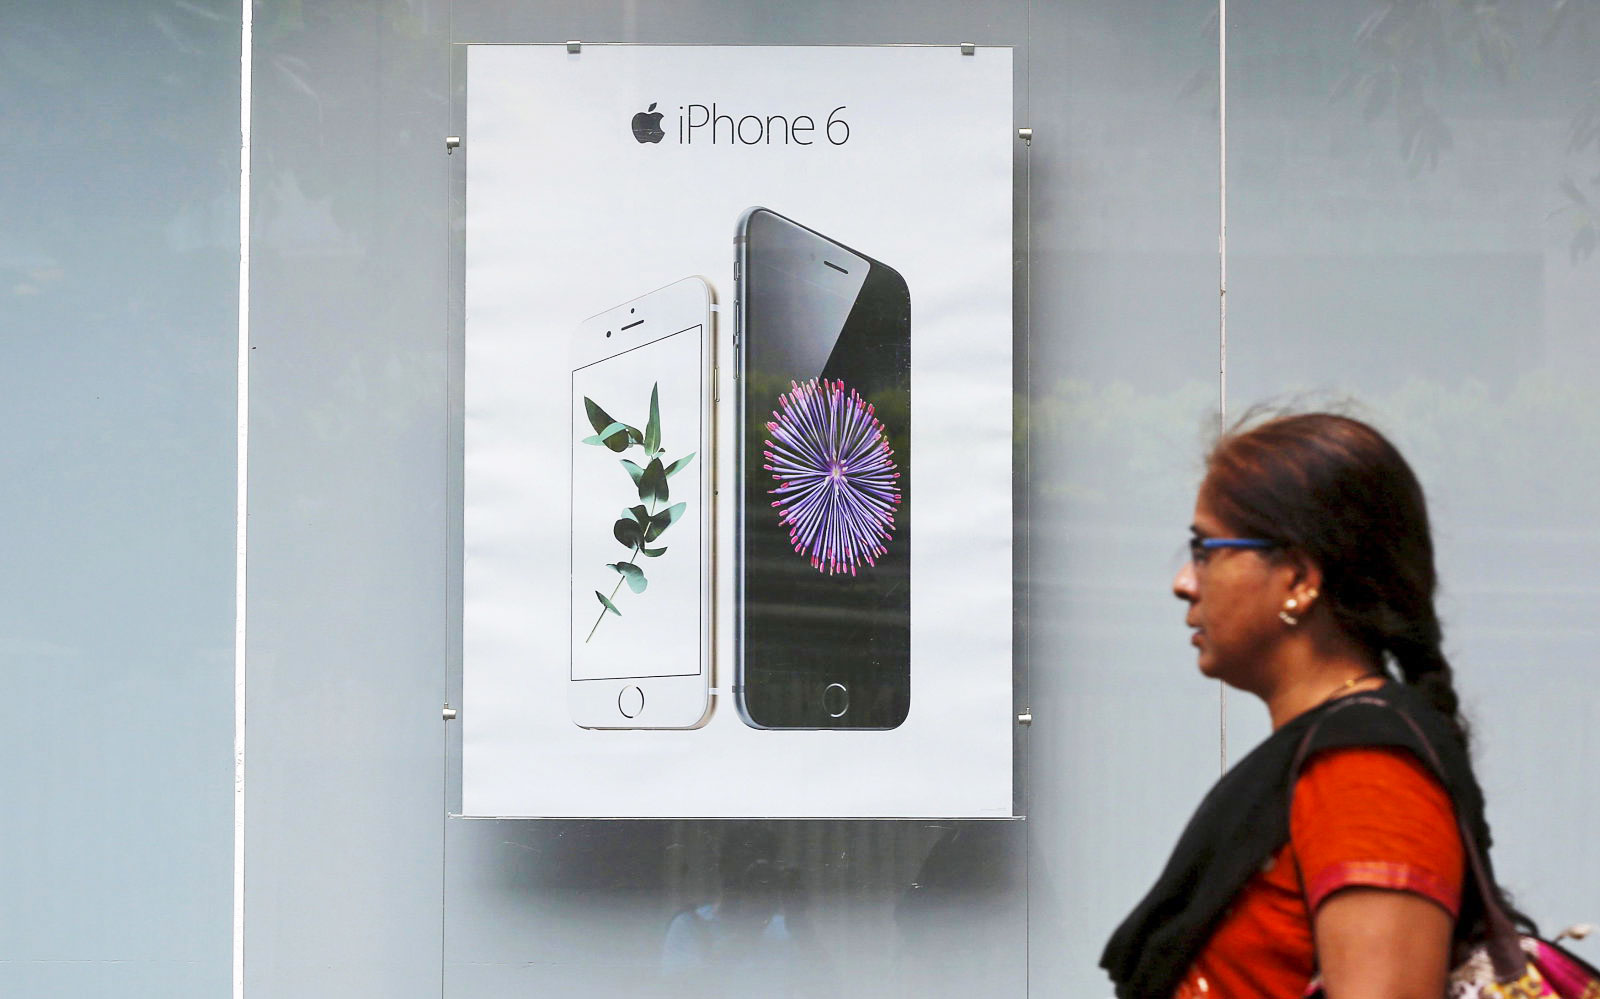 Apple might open stores in India thanks to relaxed rules